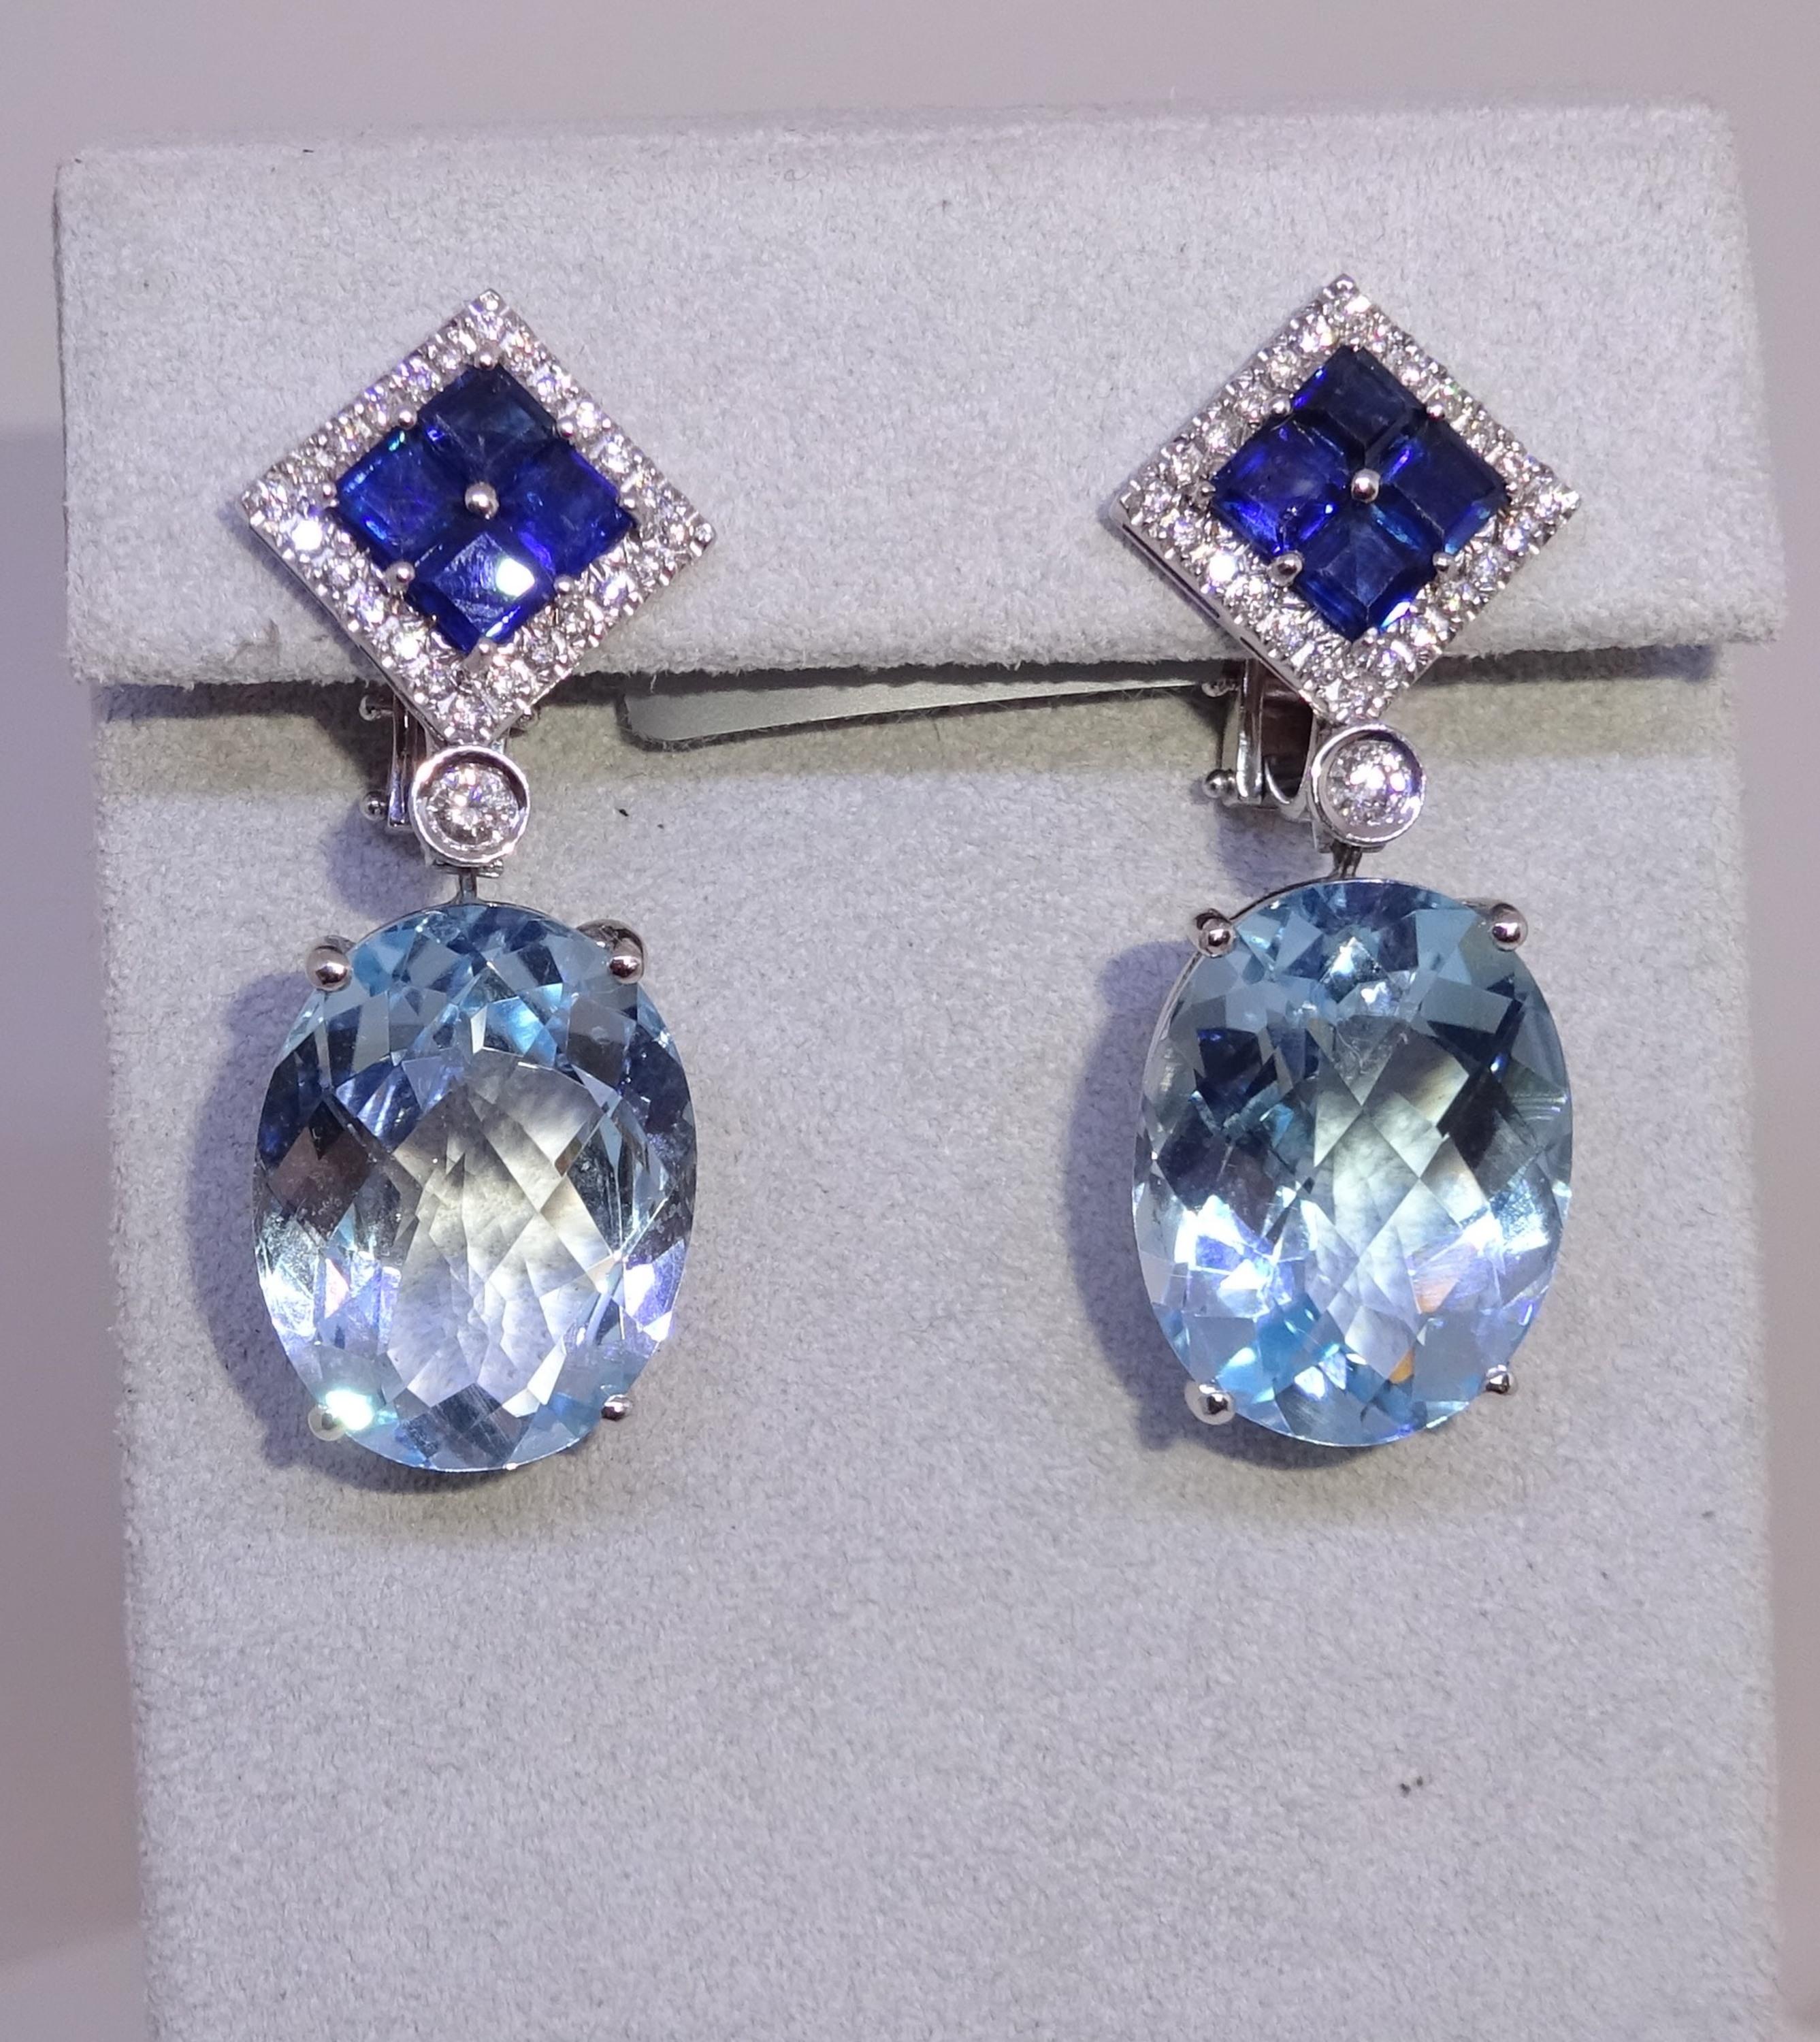 18 Karat WG Diamond,Topaz and Sapphire Dangle Earrings

50 Diamonds 1,23  Carat H SI
8 Sapphires  7,50  Carat
2 Topaz 39.00 Carat


Founded in 1974, Gianni Lazzaro is a family-owned jewelry company based out of Düsseldorf, Germany.
Although rooted